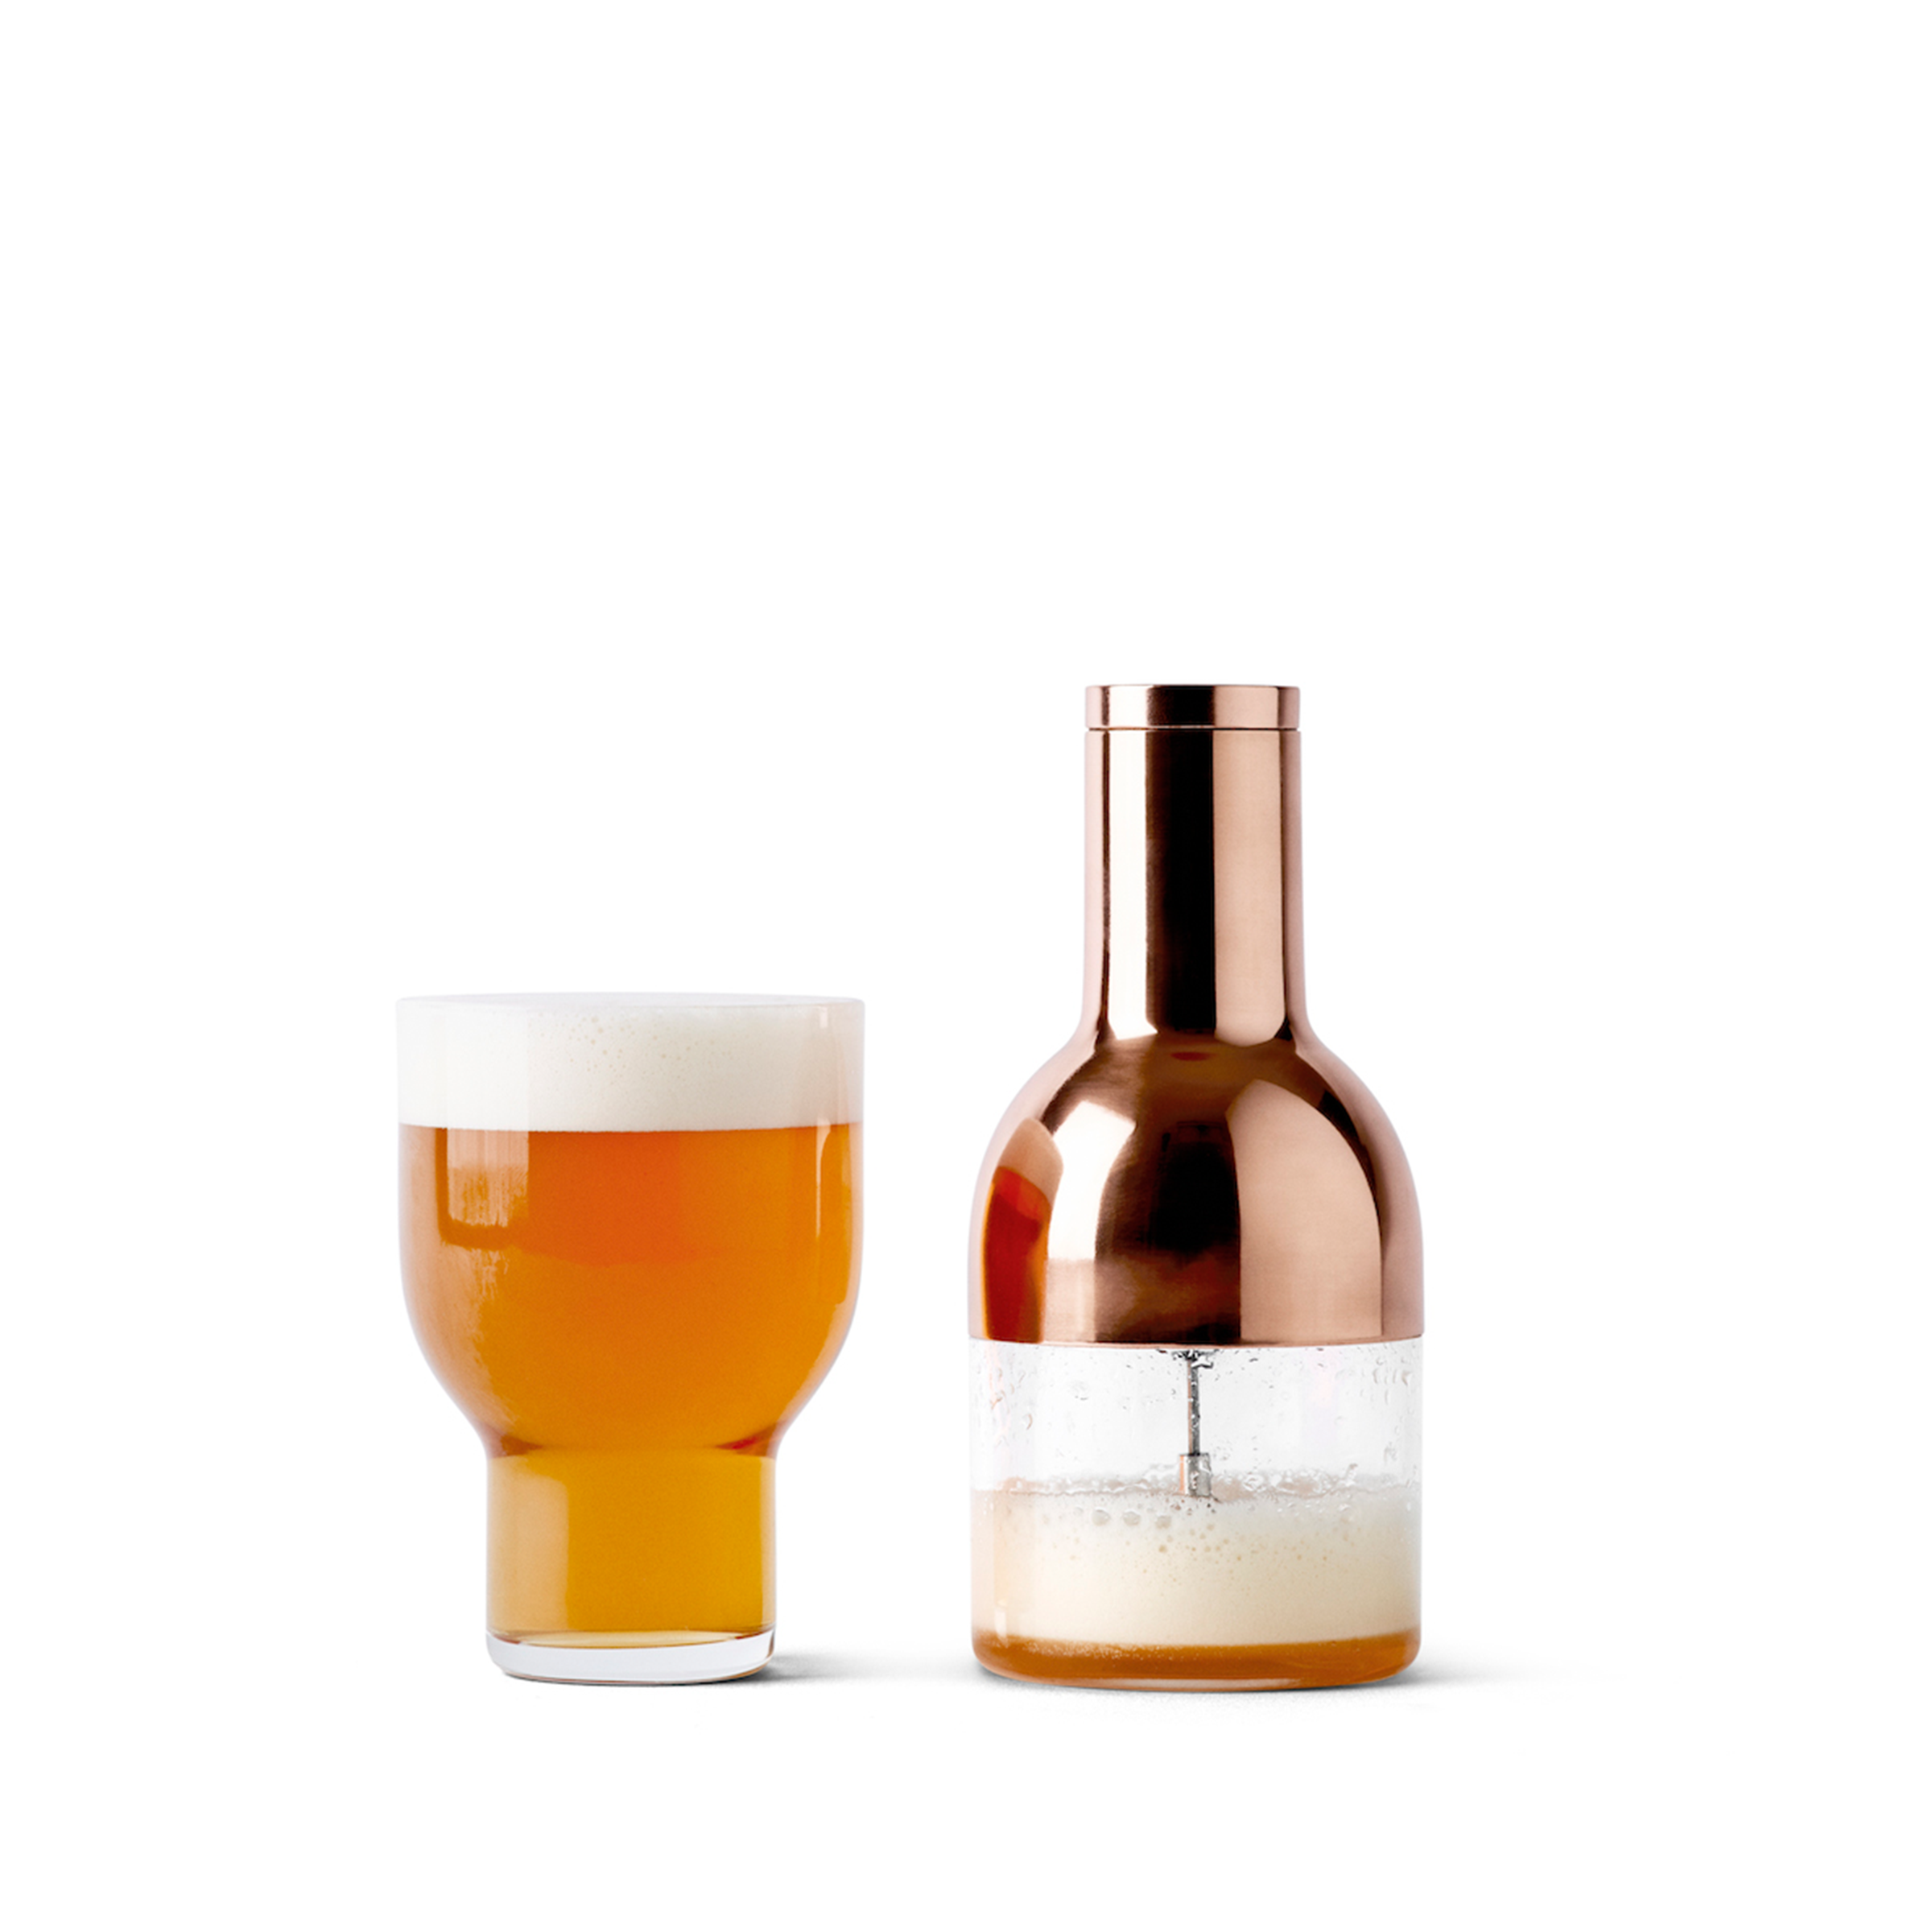 beer foamer by norm architects for menu.